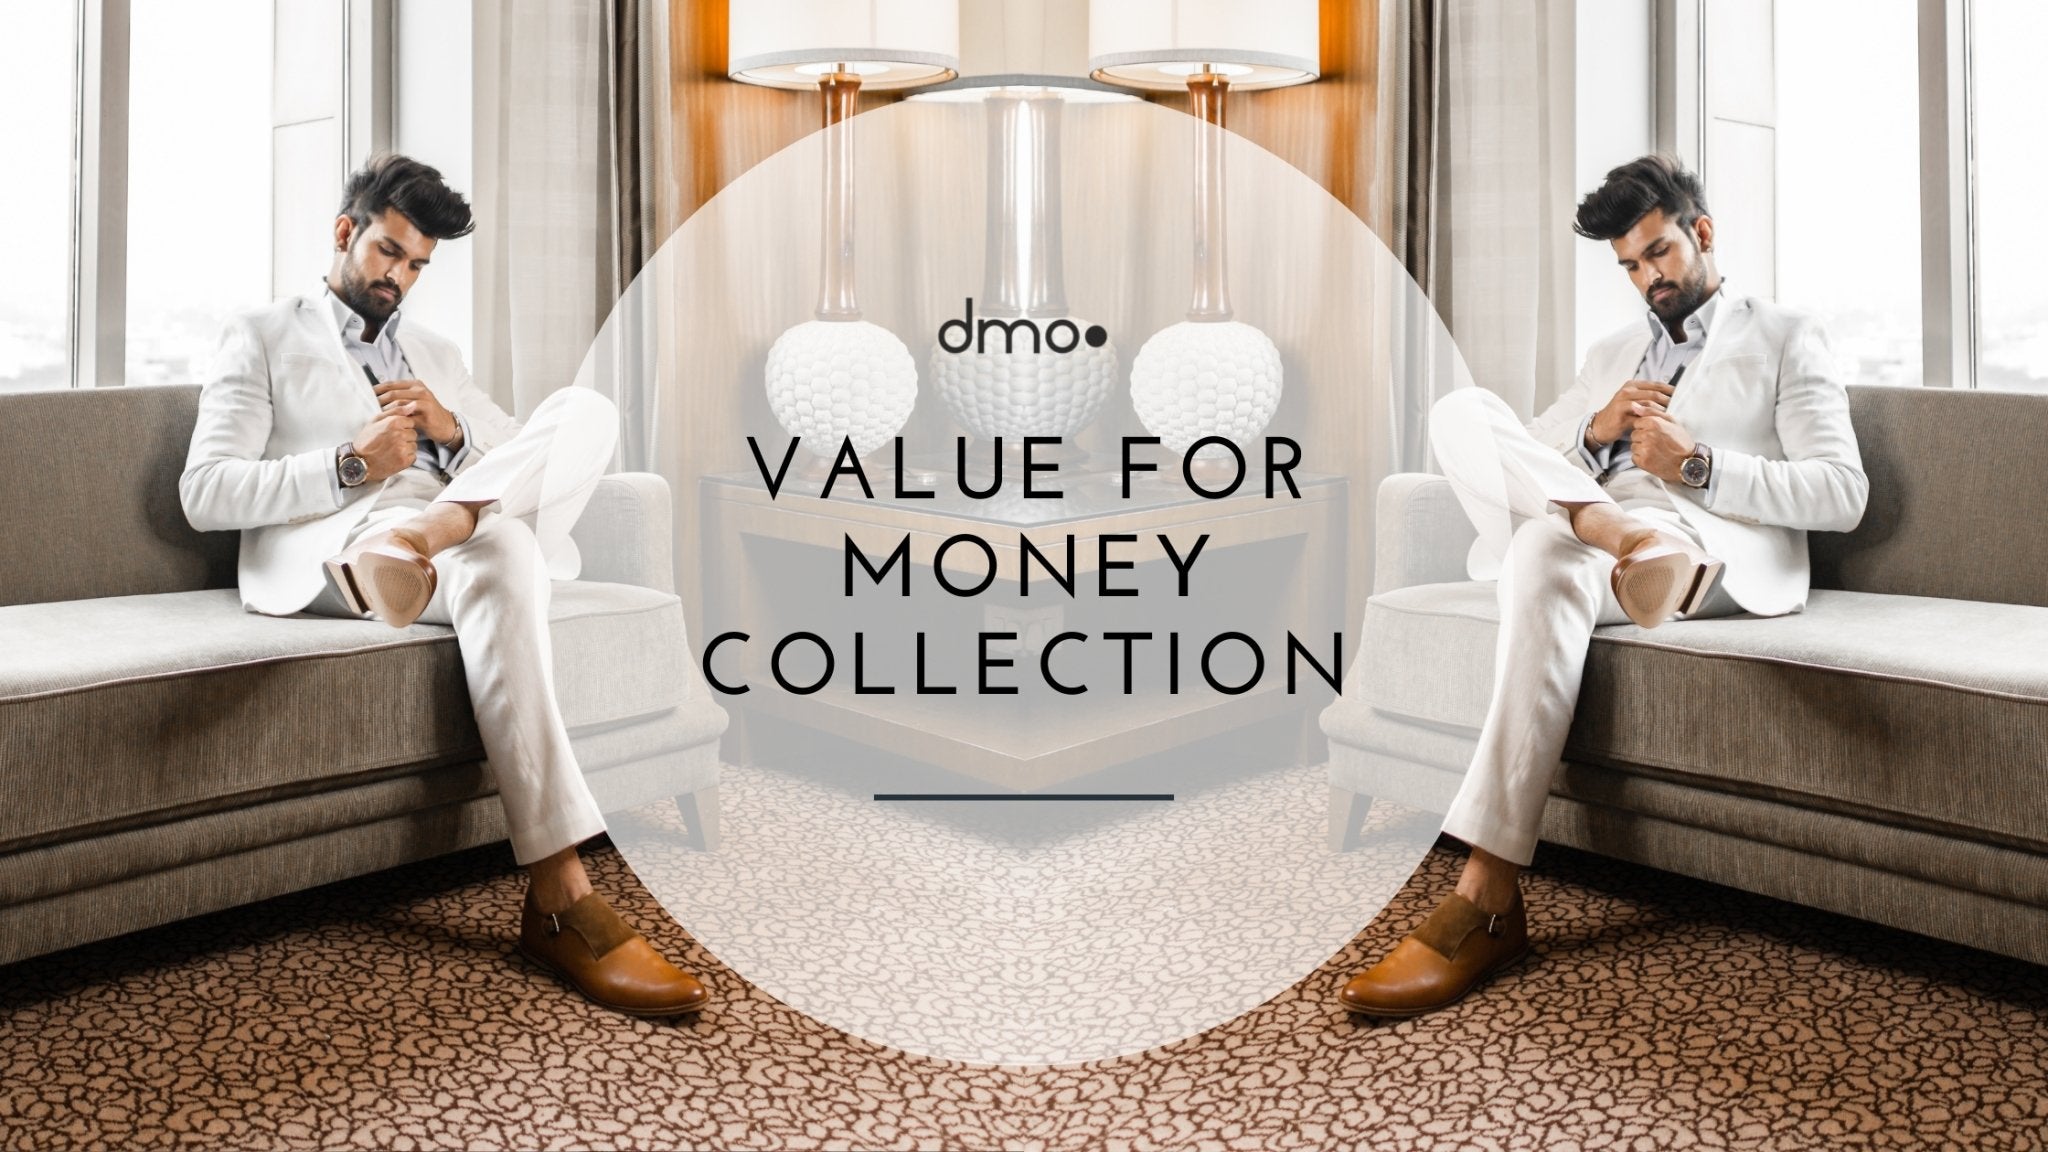 Value for Money Collection - dmodot Shoes